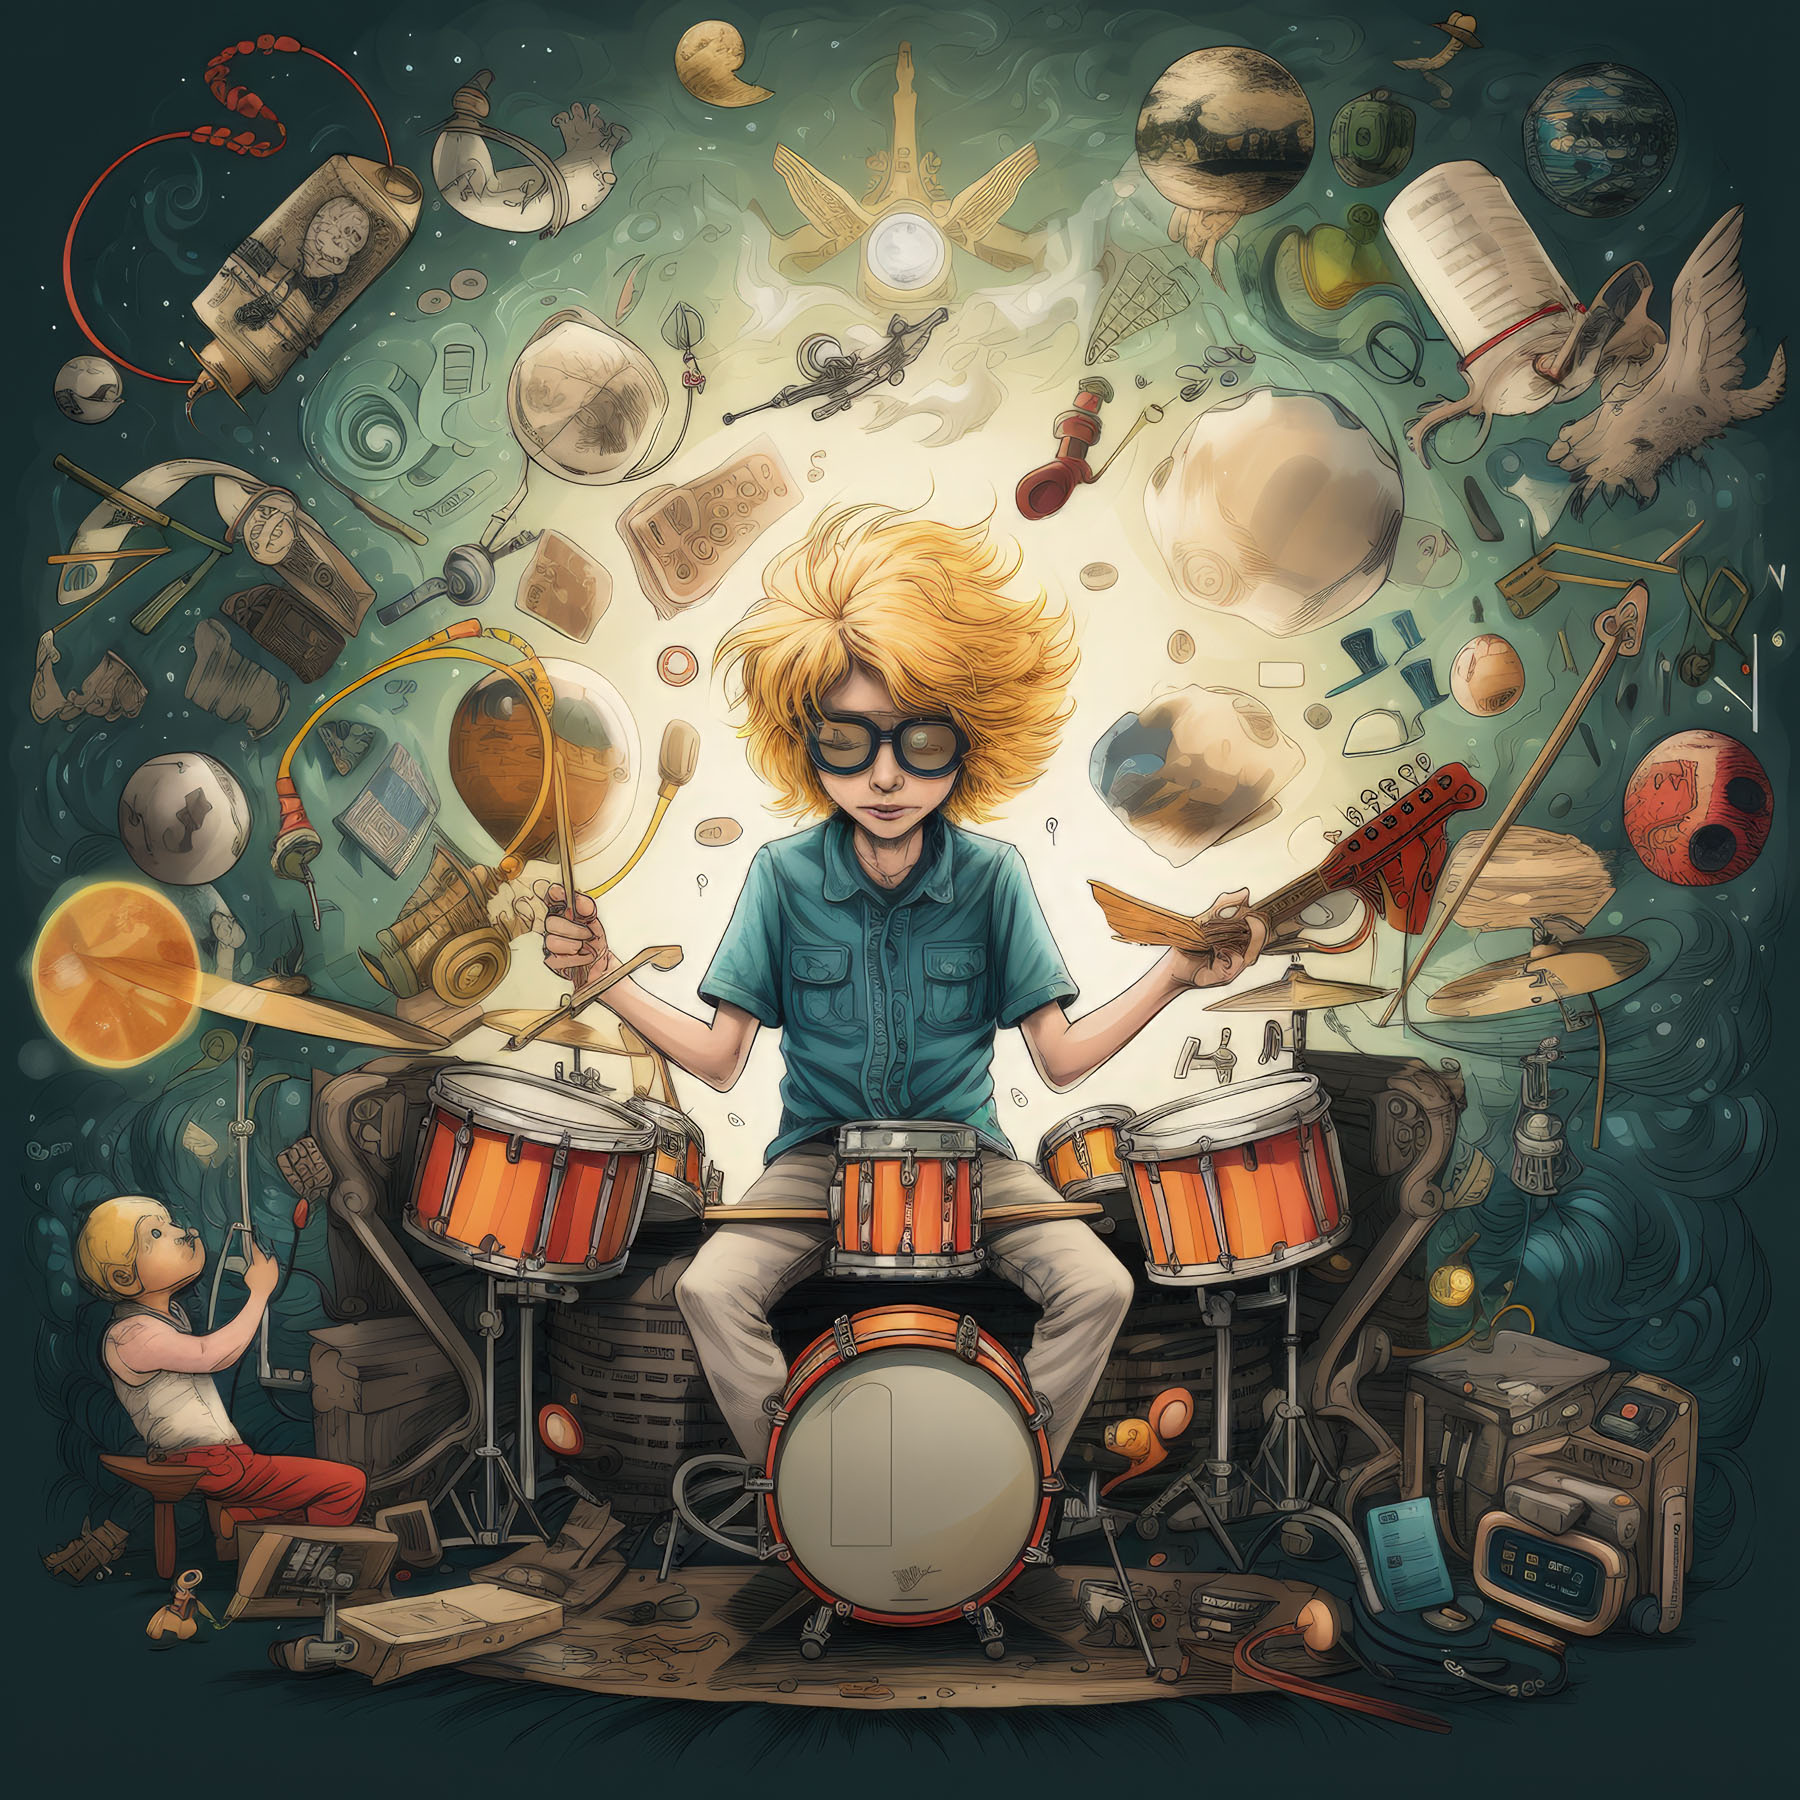 Long haired boy with sunglasses holds a drumstick and a broken guitar while sitting at a drumset. Strange objects float above him in space.